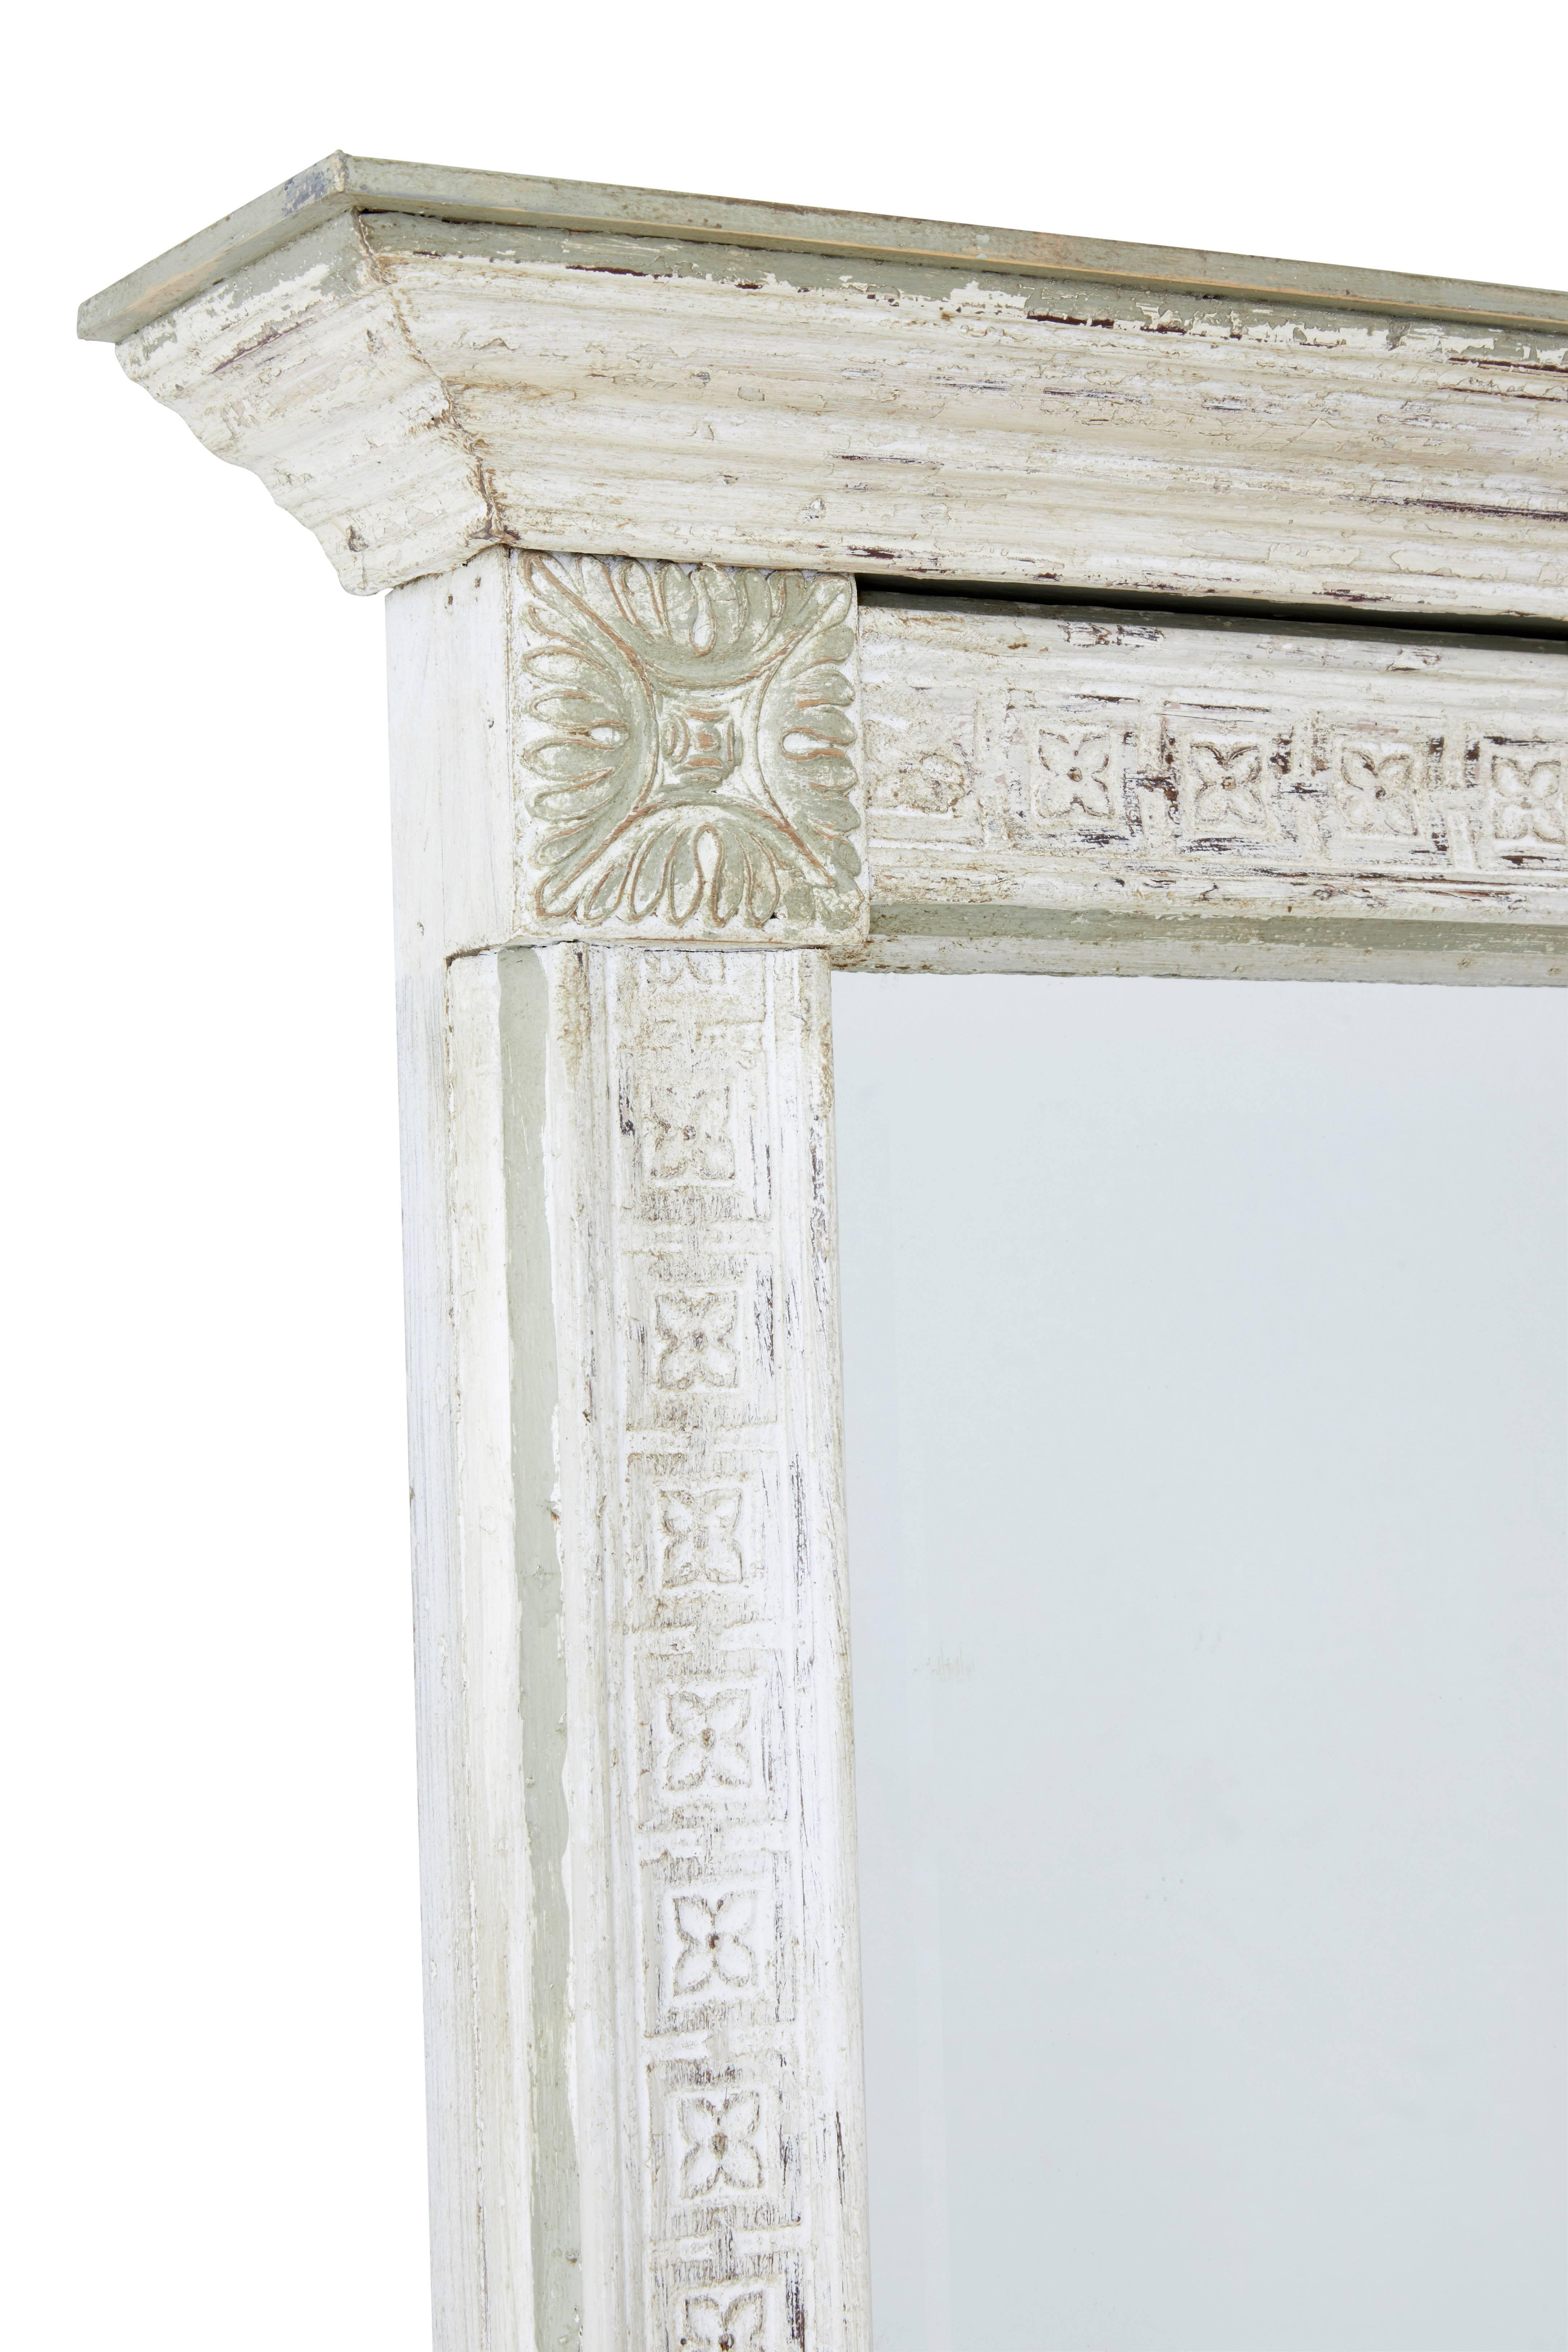 Impressive large pier / wall mirror circa 1980.

Made from 19th century mouldings, featuring carved rosettes.

Original paint which has been scraped back to reveal bare wood.

Mirror with bevelled edge